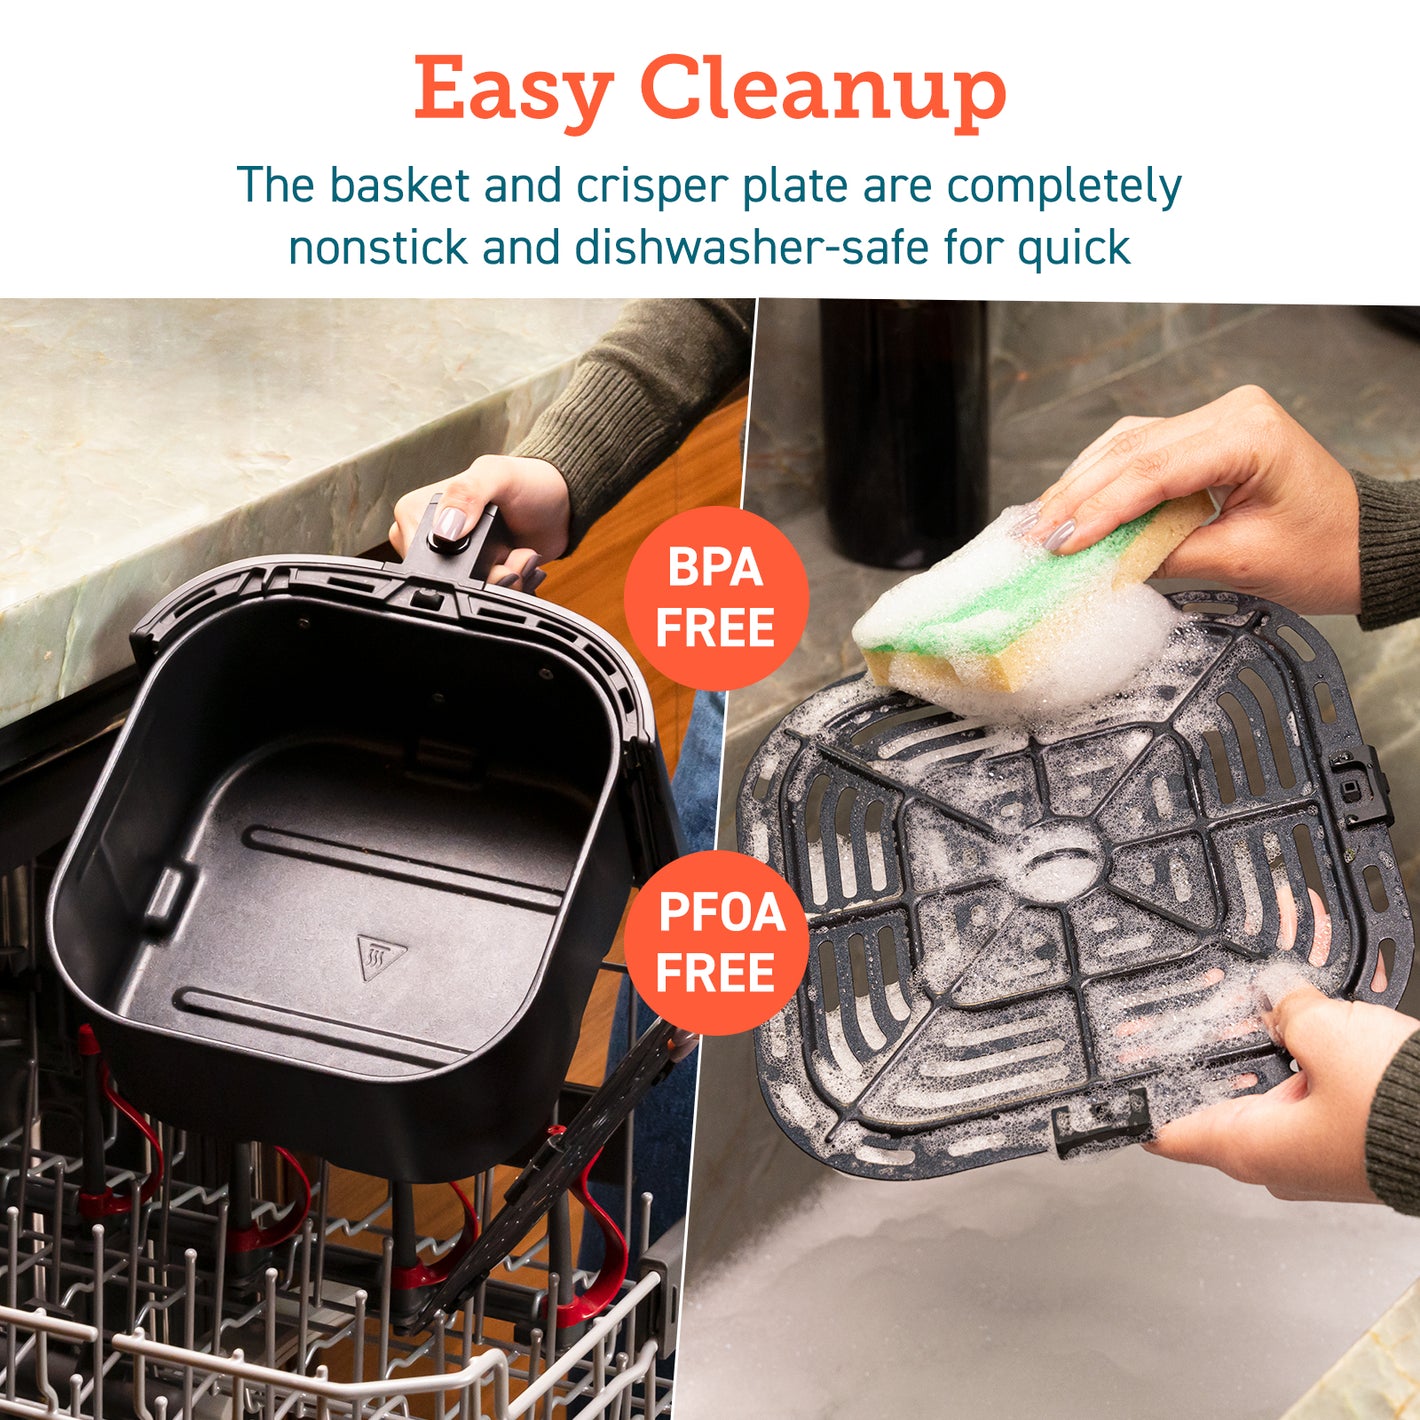 Easy Cleanup The basket and crisper plate are completely nonstick and diswasher-safe for quick